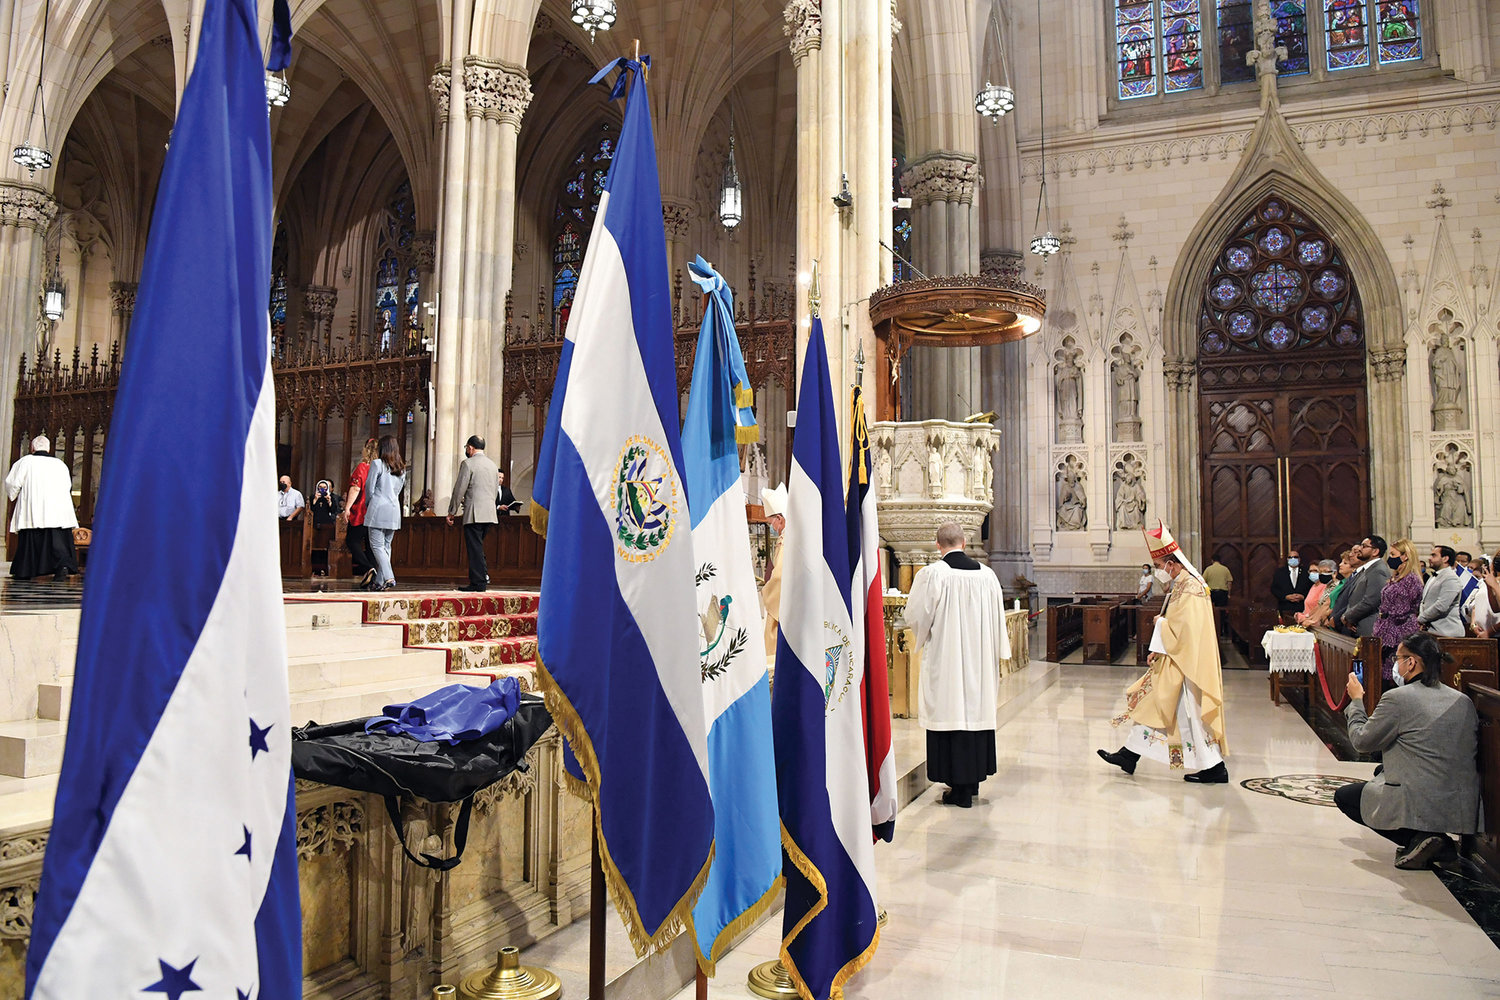 Cardinal Gregorio Rosa Chávez, auxiliary bishop of the Archdiocese of San Salvador, El Salvador, walks past the flags of five Central American nations marking their bicentennial at a Mass he offered in St. Patrick’s Cathedral Sept. 19.